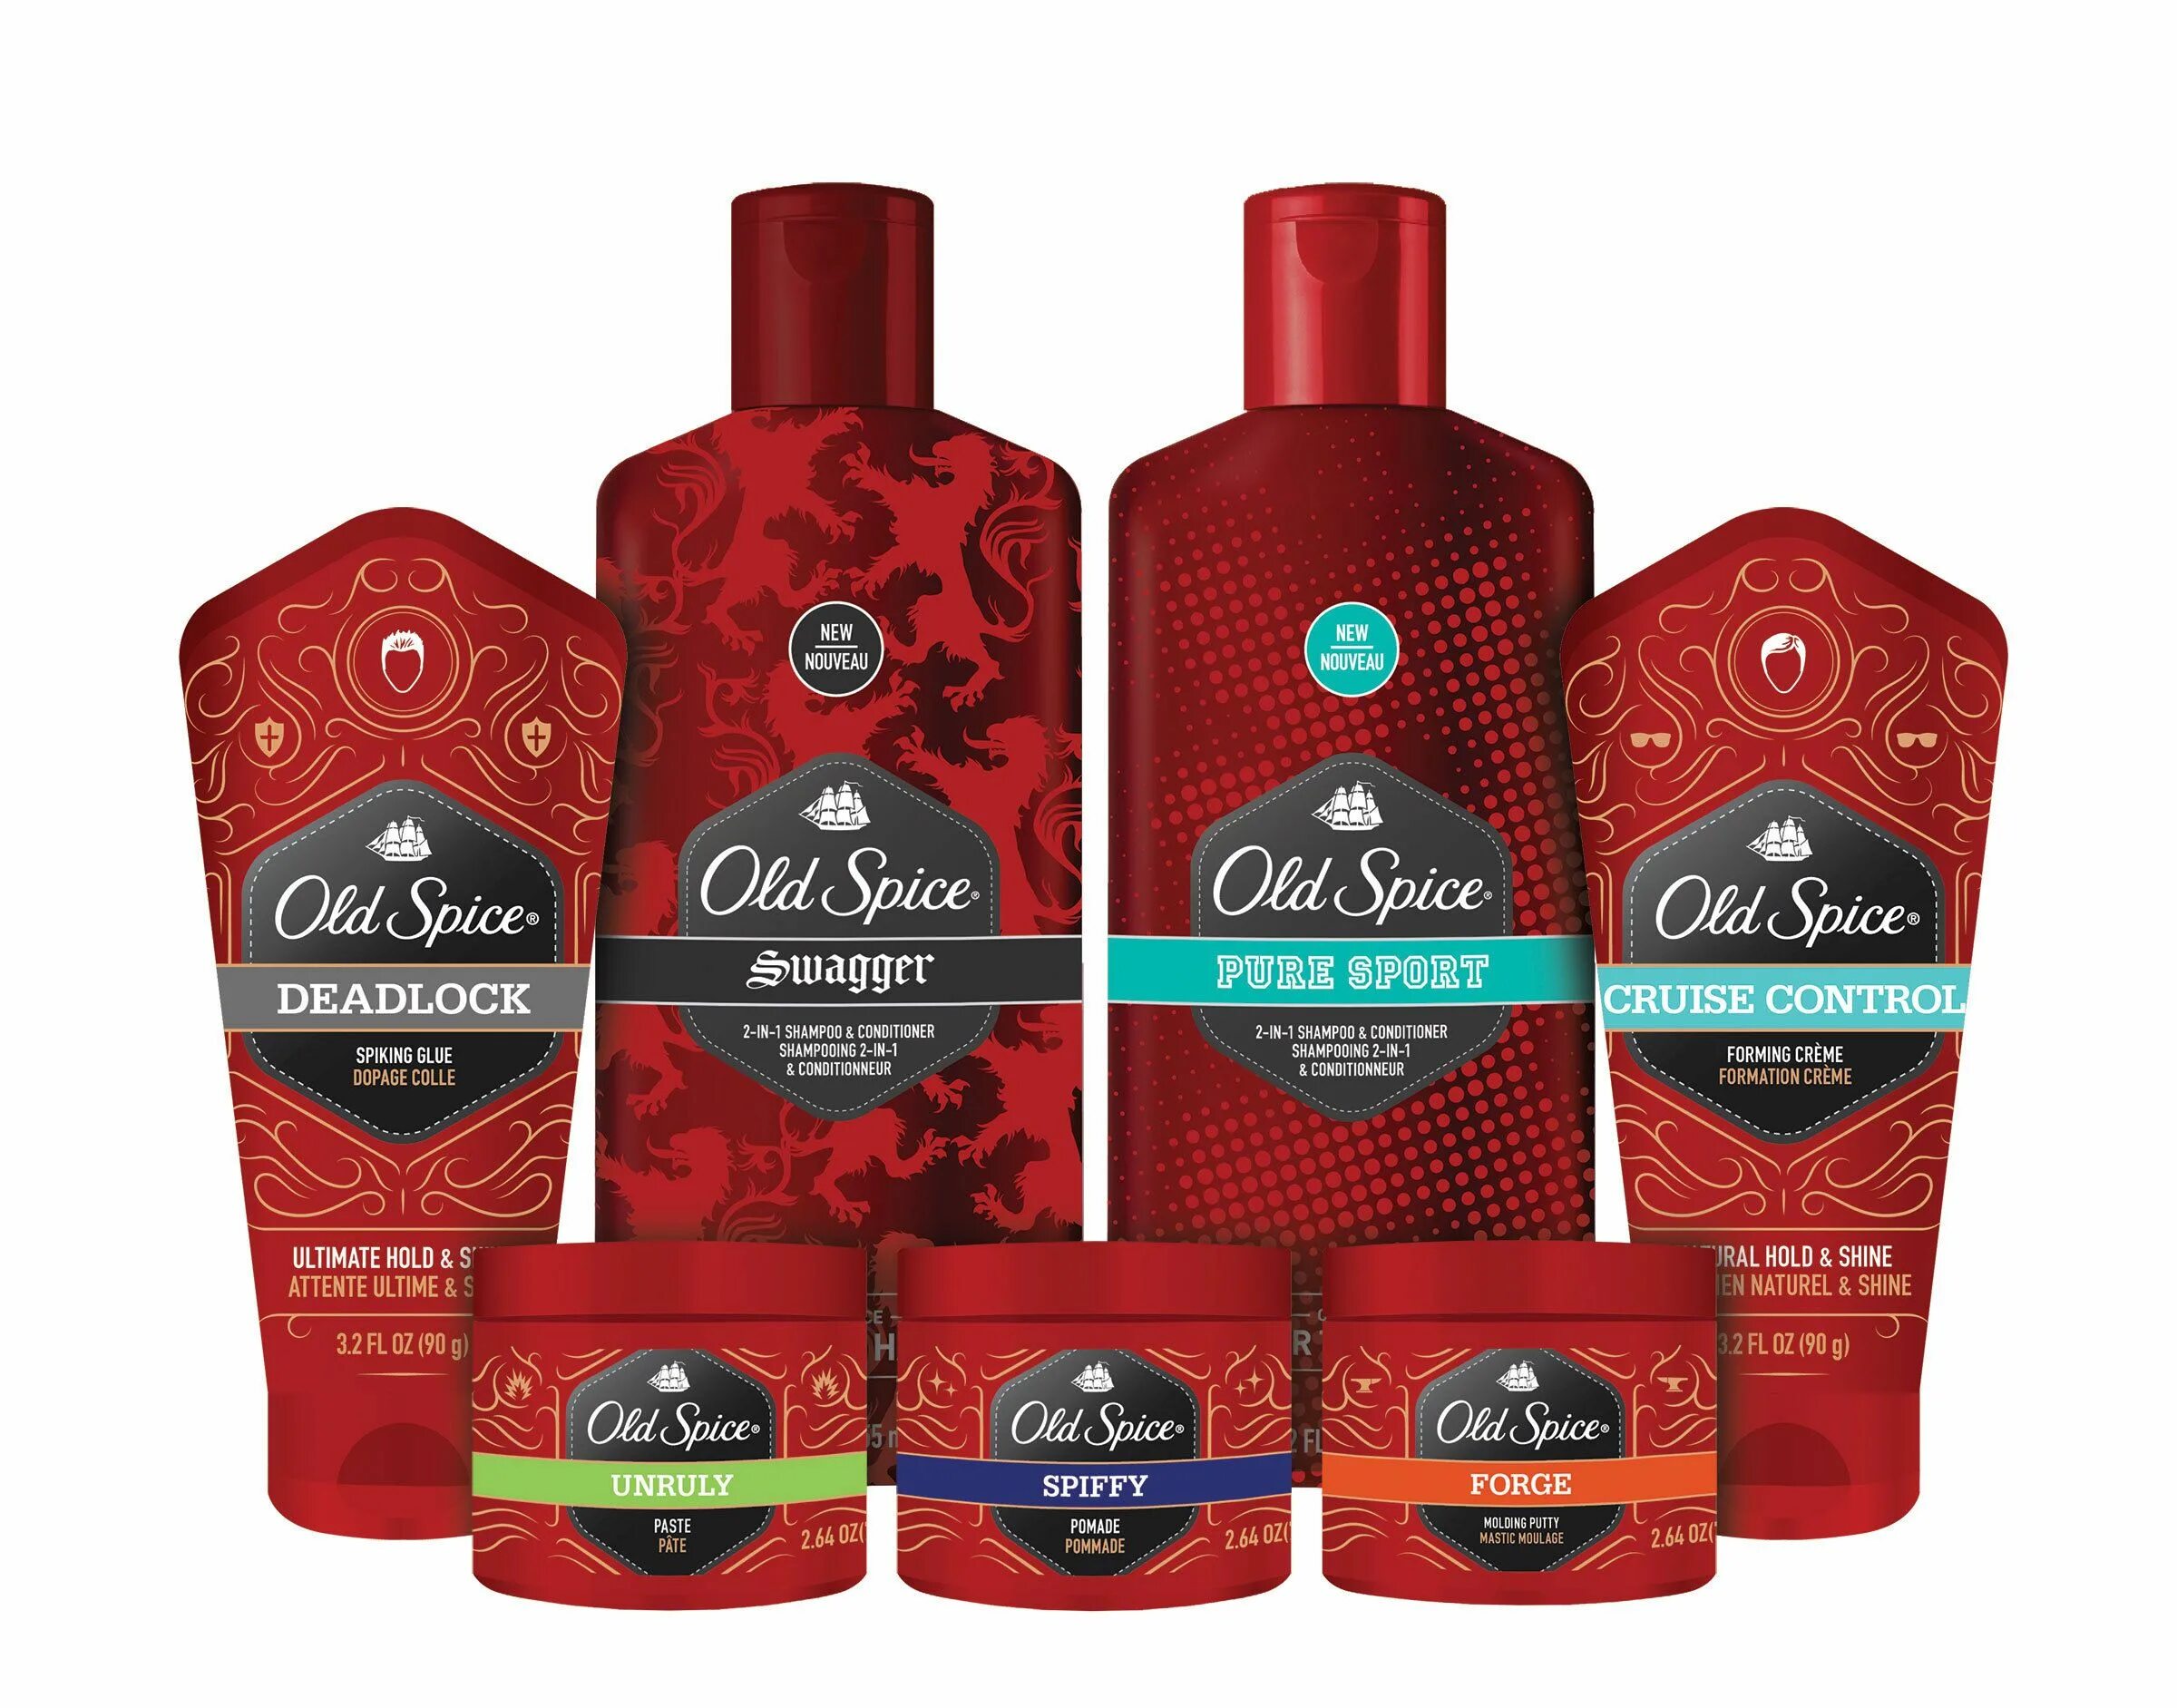 Old product. Продукция old Spice. Old Spice продукты. Новый old Spice. OLS Space.